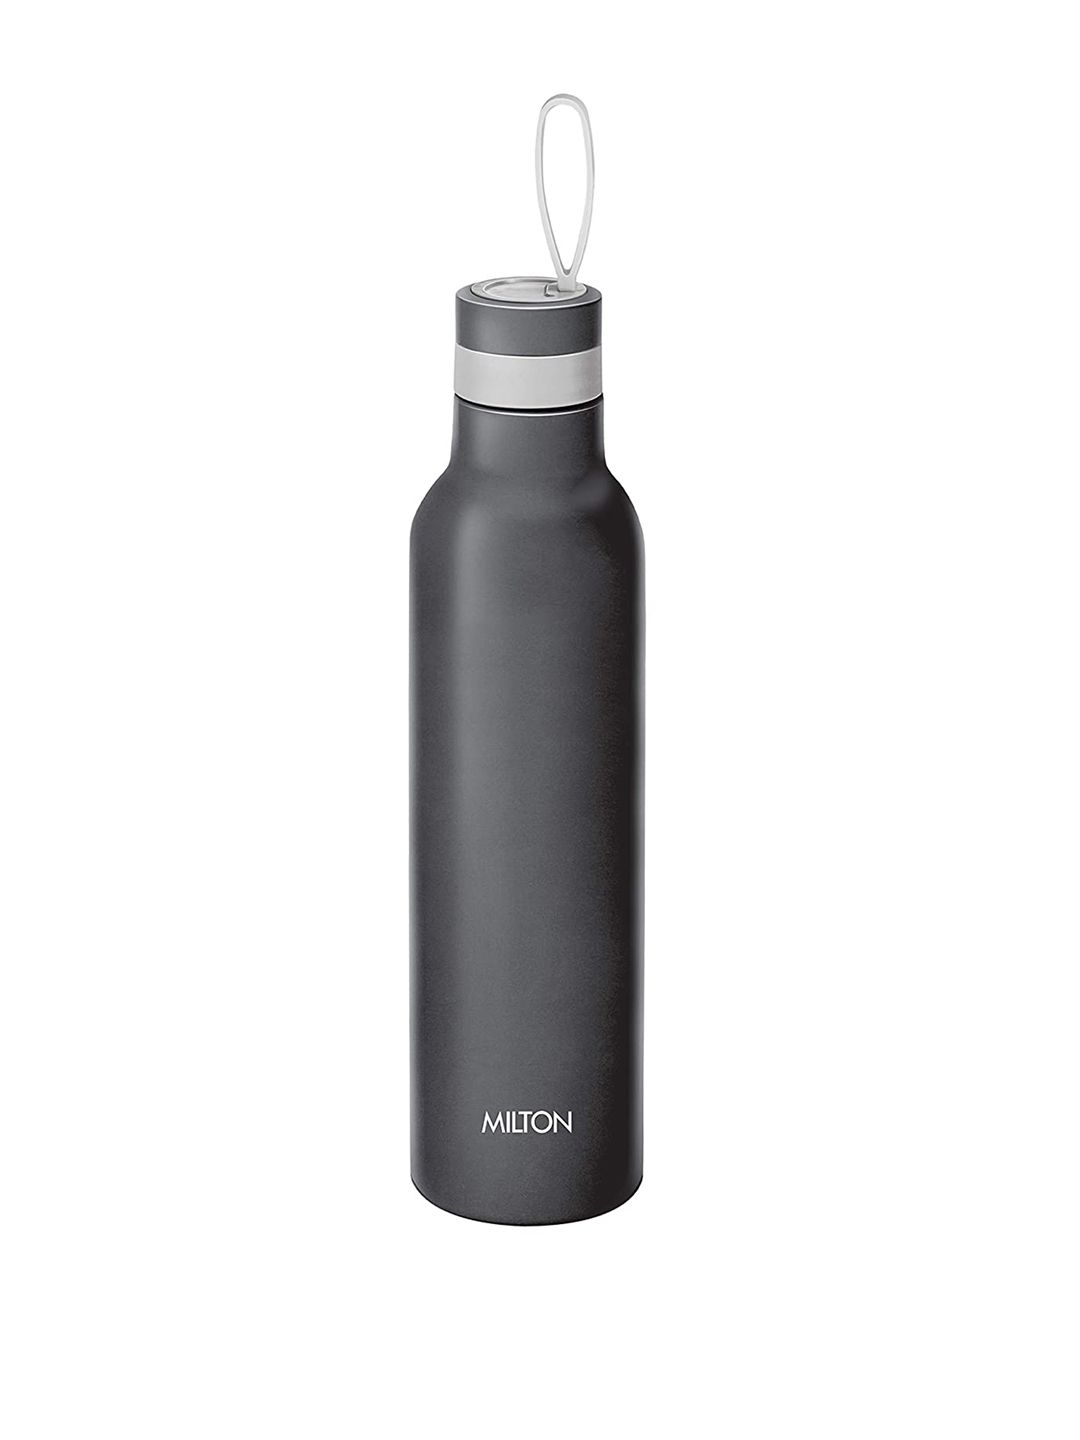 Milton Black Thermosteel Hot & Cold Water Bottle 720 ml Price in India